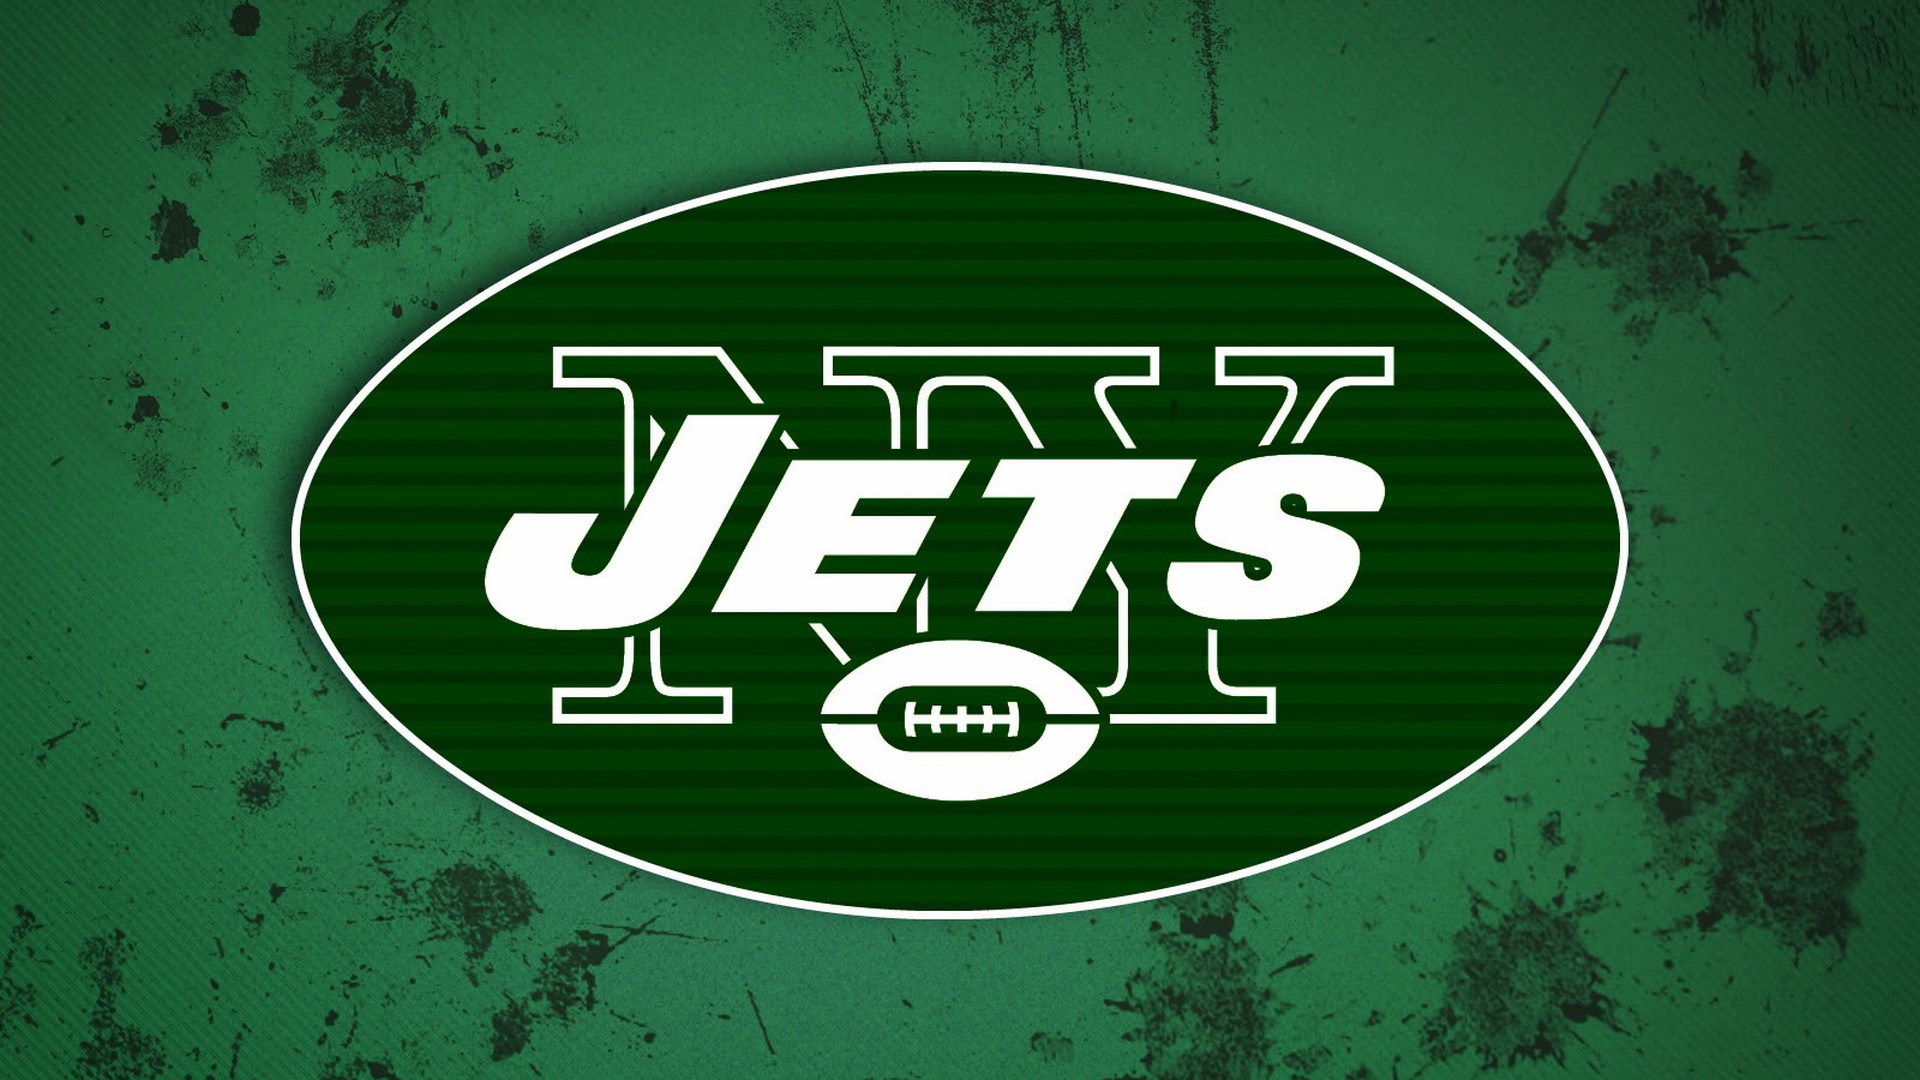 New York Jets Wallpaper with resolution 1920x1080 pixel. You can make this wallpaper for your Mac or Windows Desktop Background, iPhone, Android or Tablet and another Smartphone device